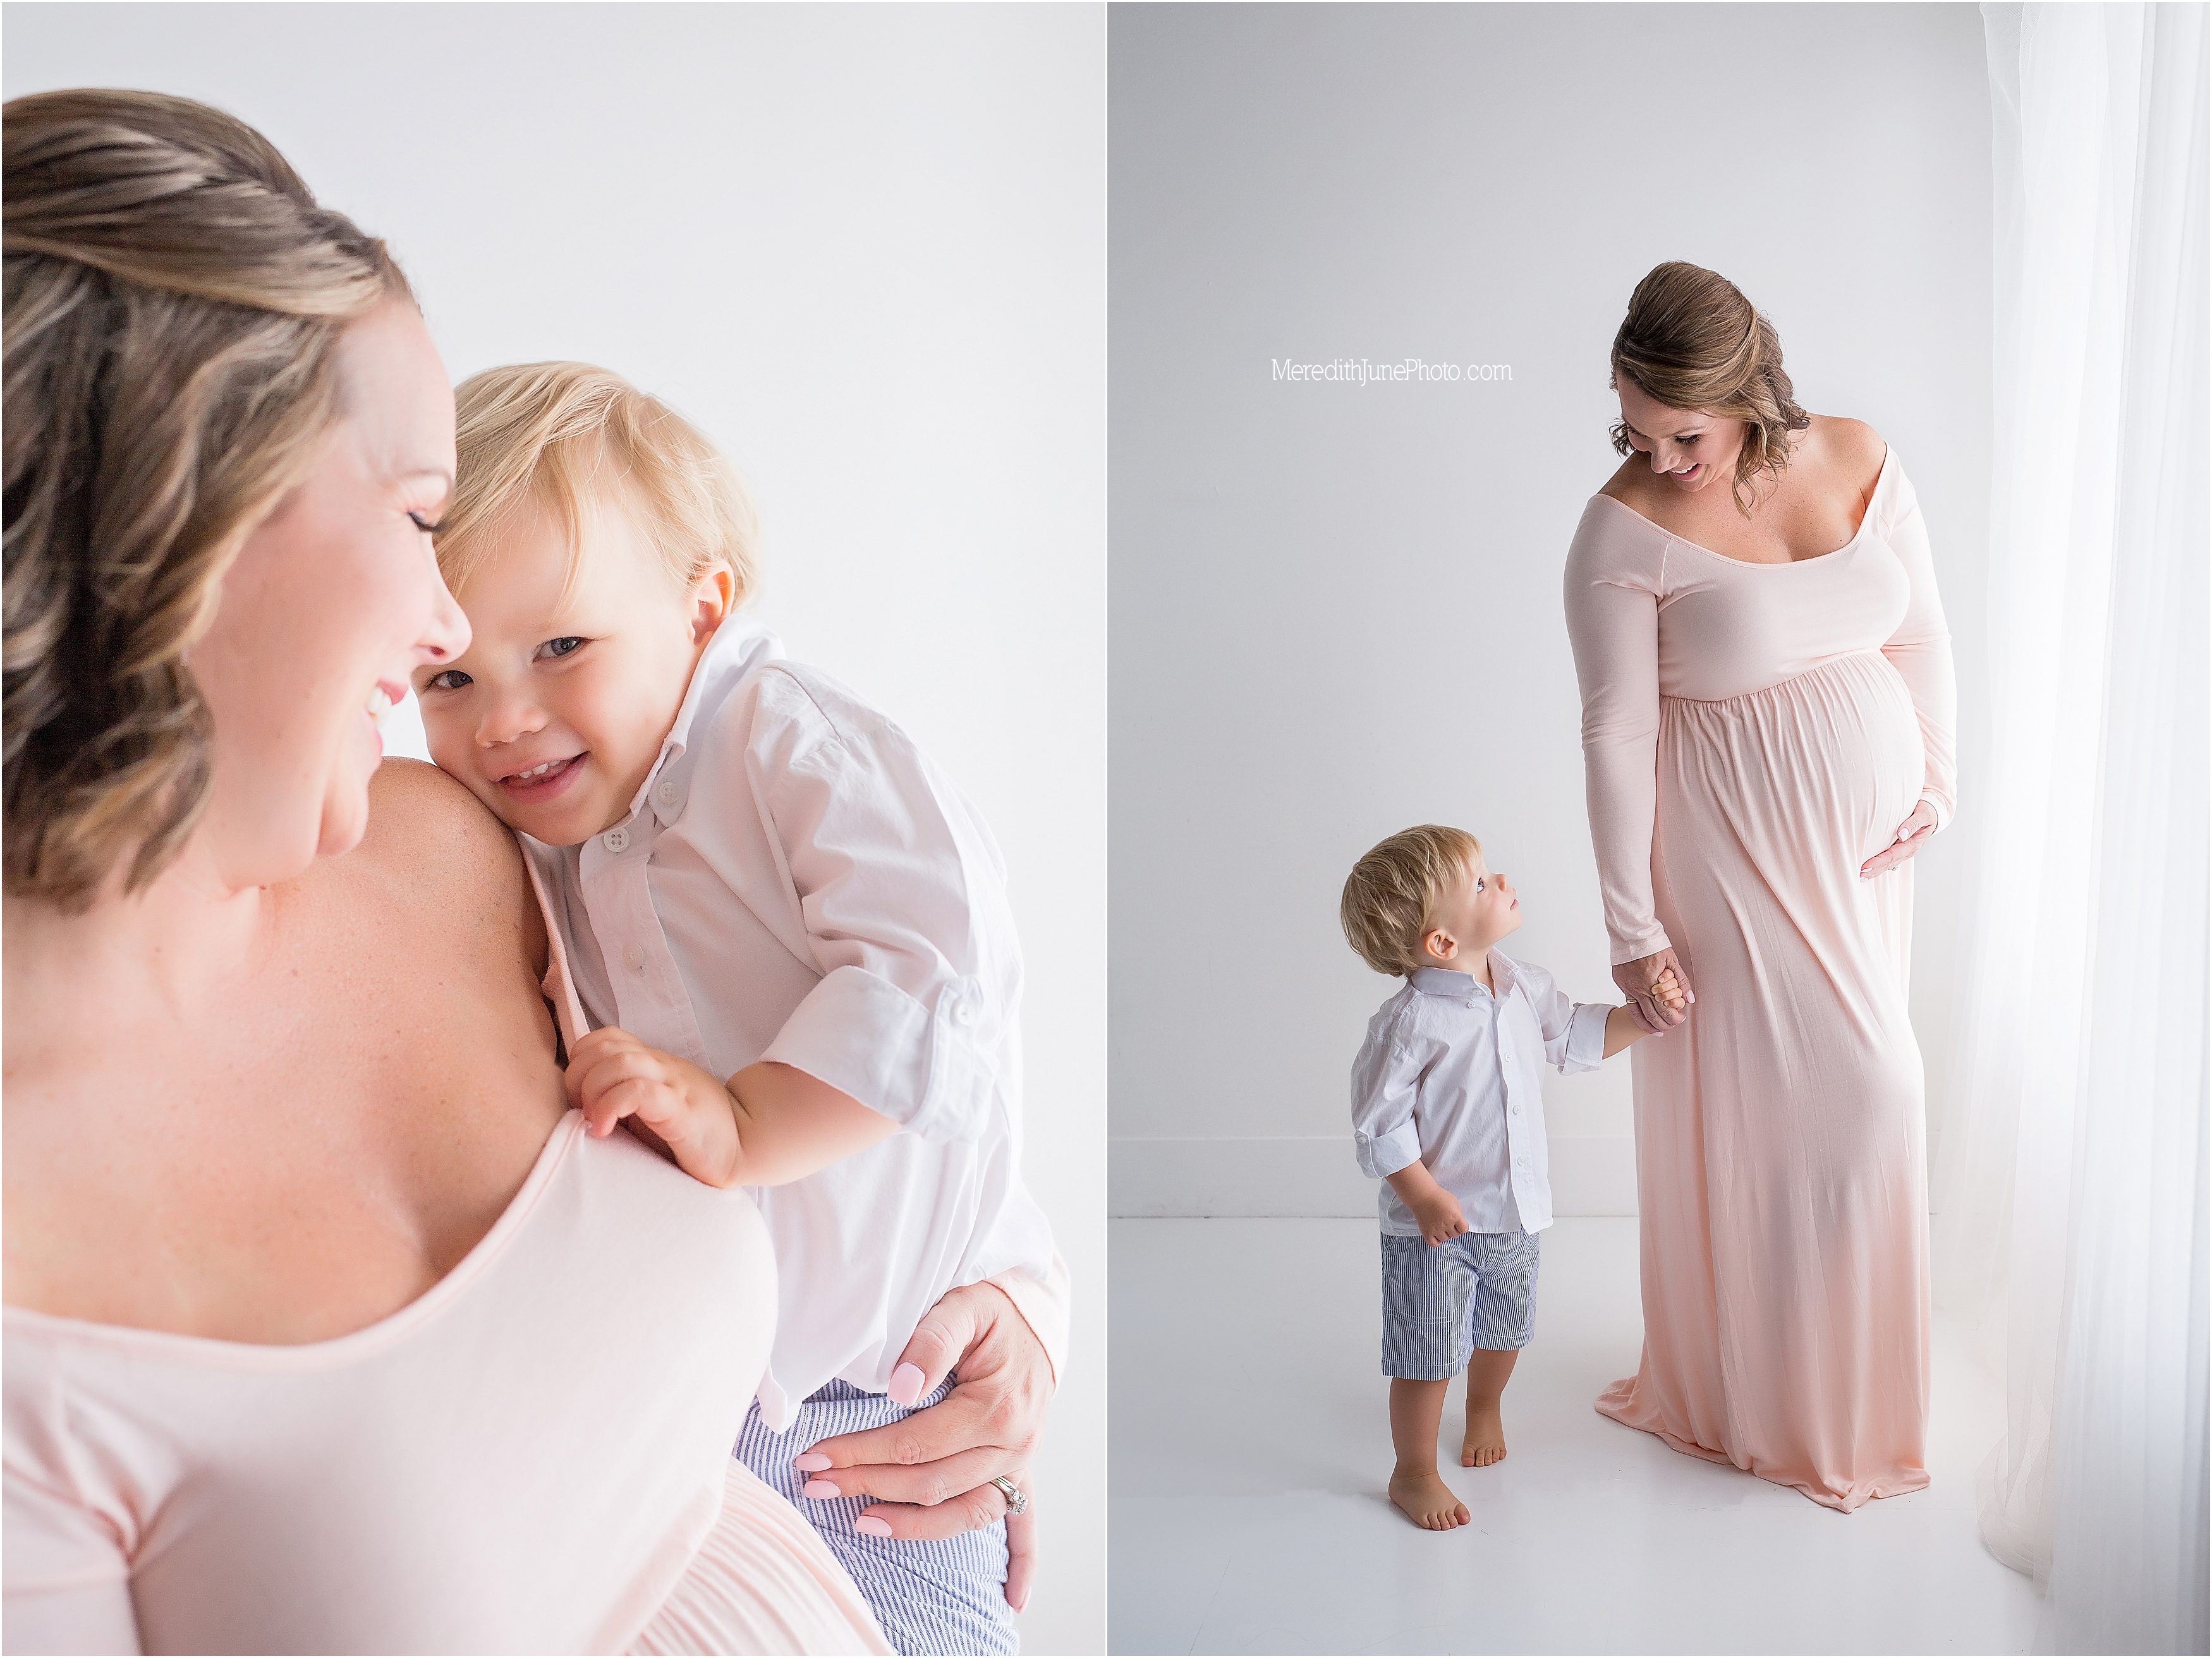 gorgeous studio maternity session at Meredith June Photography